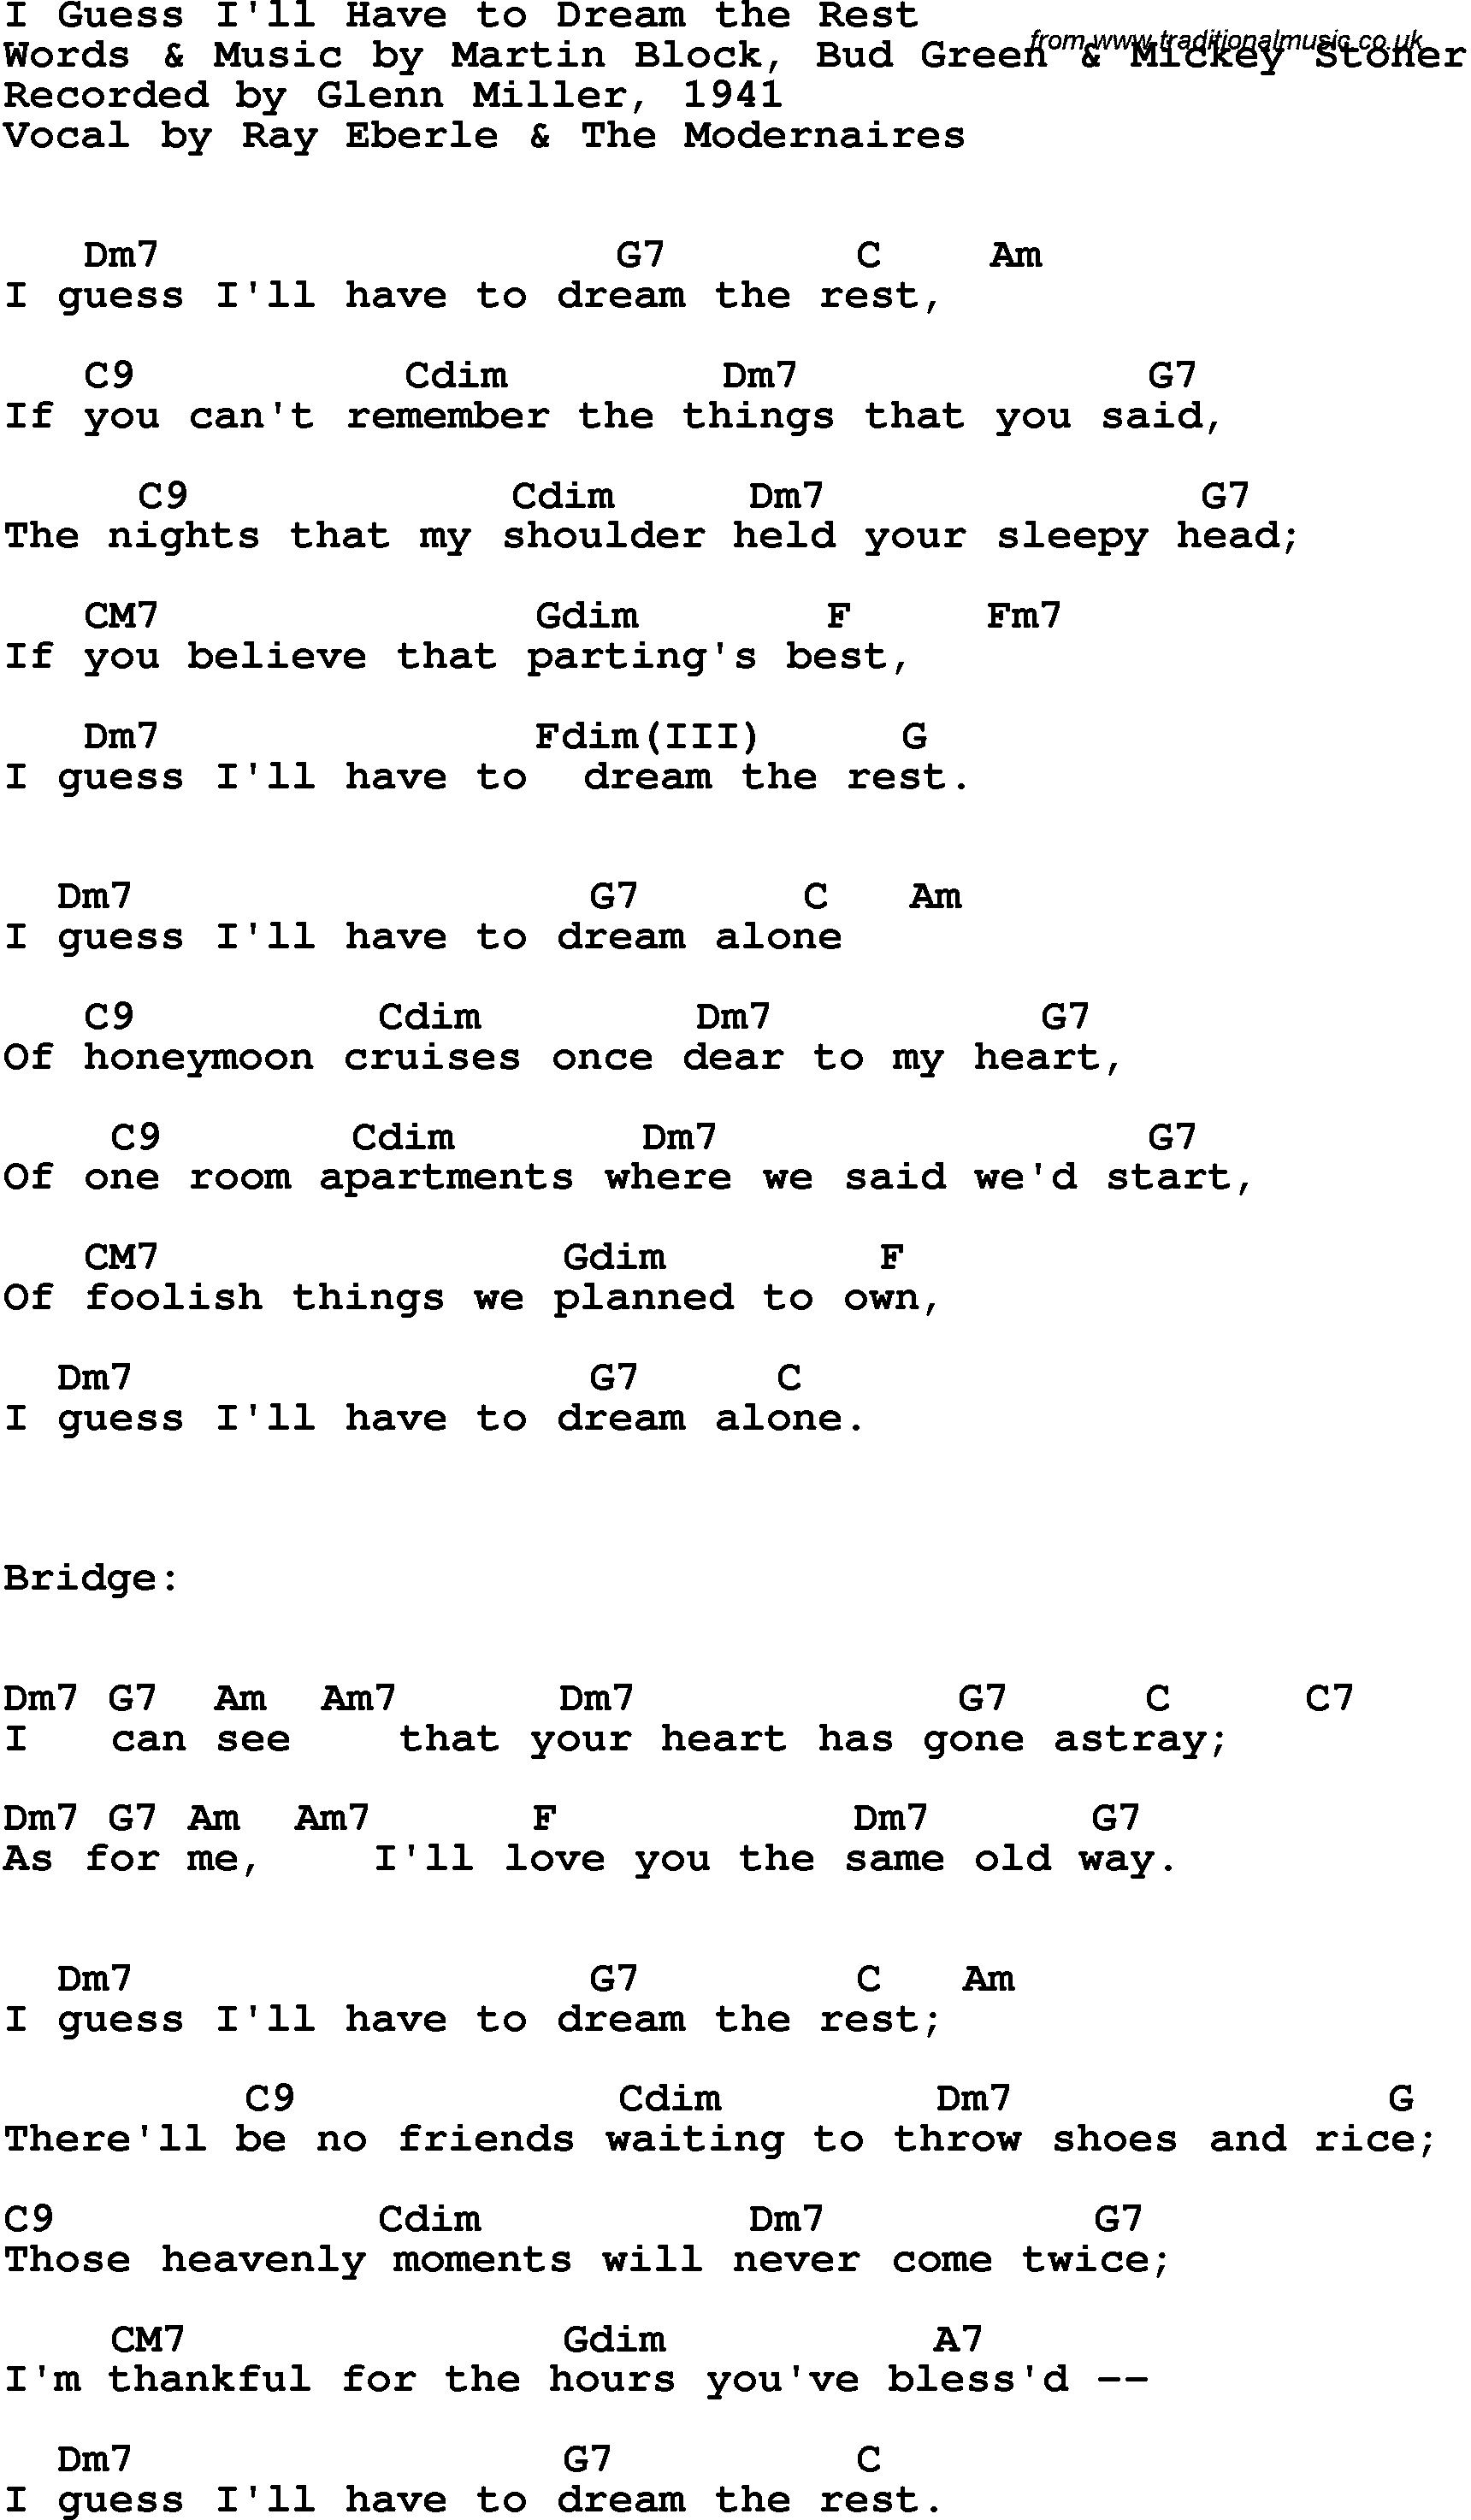 Song Lyrics with guitar chords for I Guess I'll Have To Dream The Rest - Glenn Miller, 1941